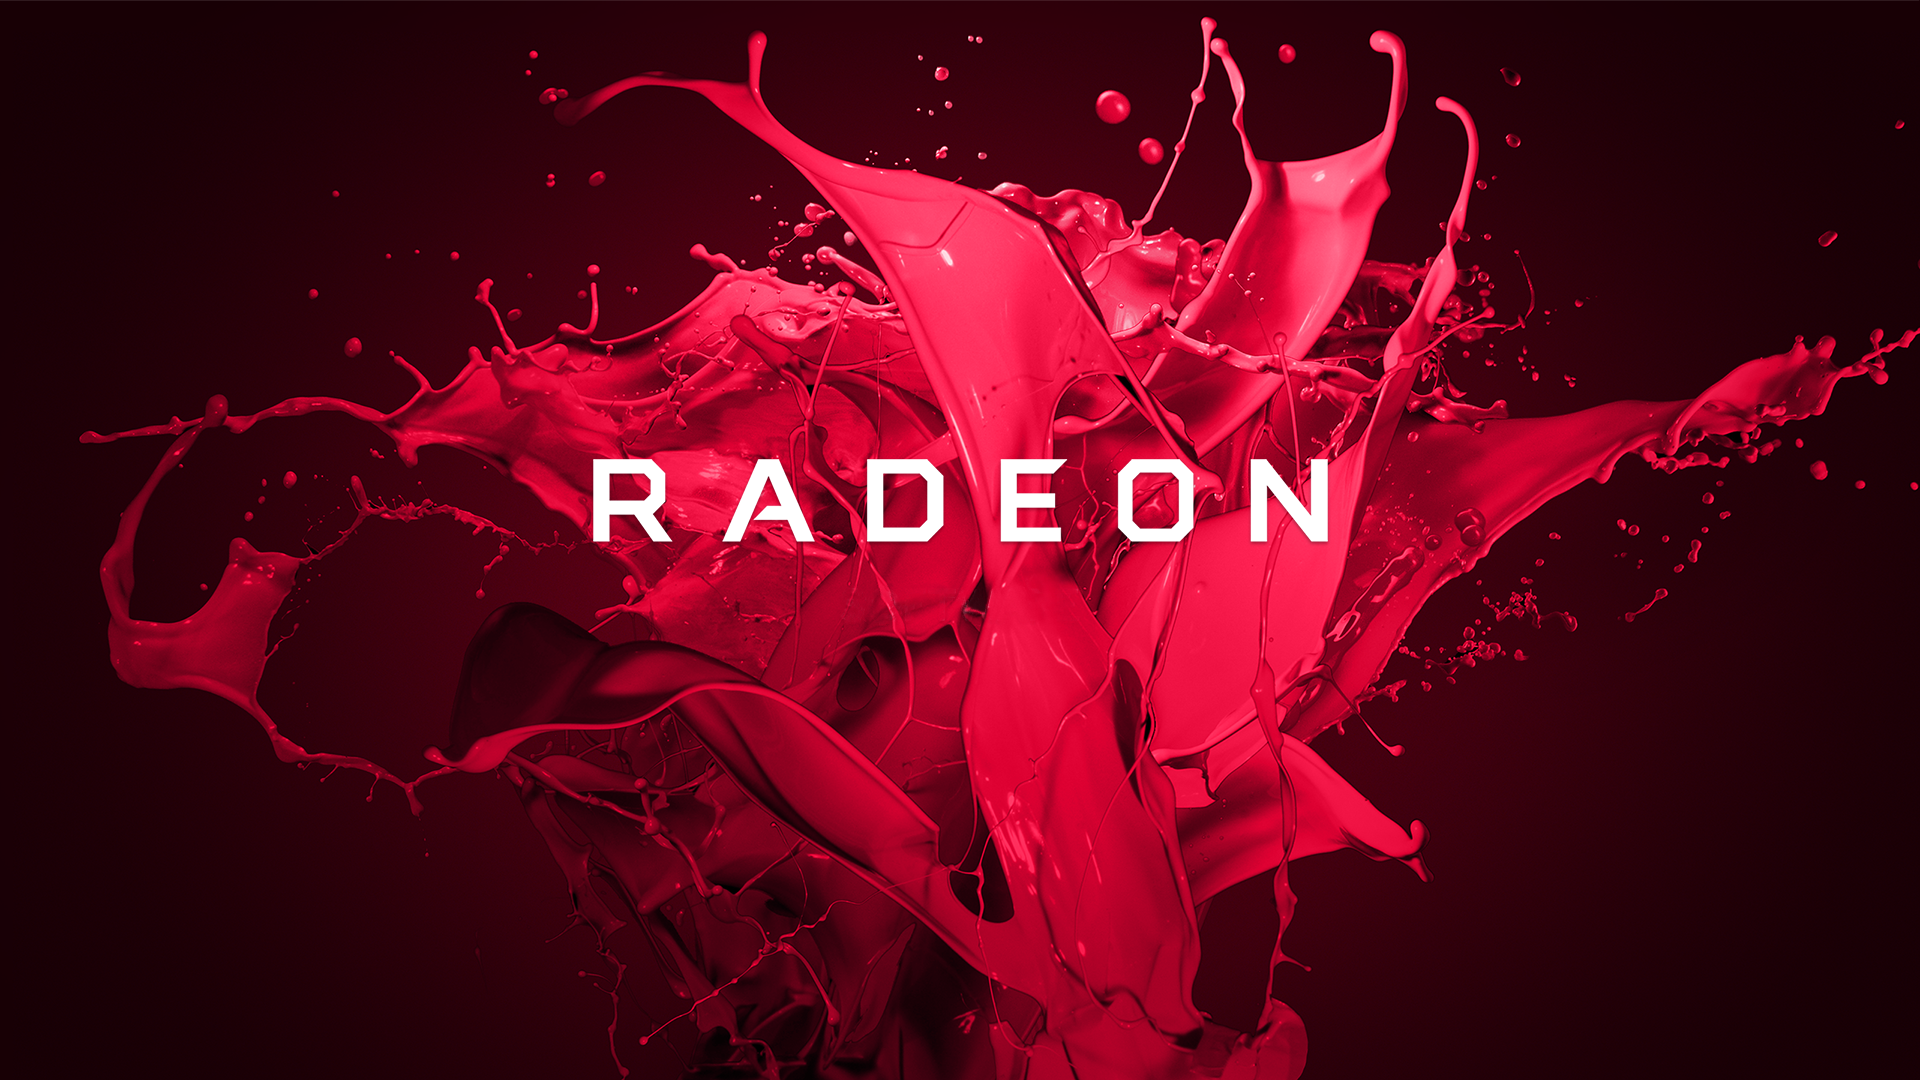 Download the Latest Radeon Drivers.